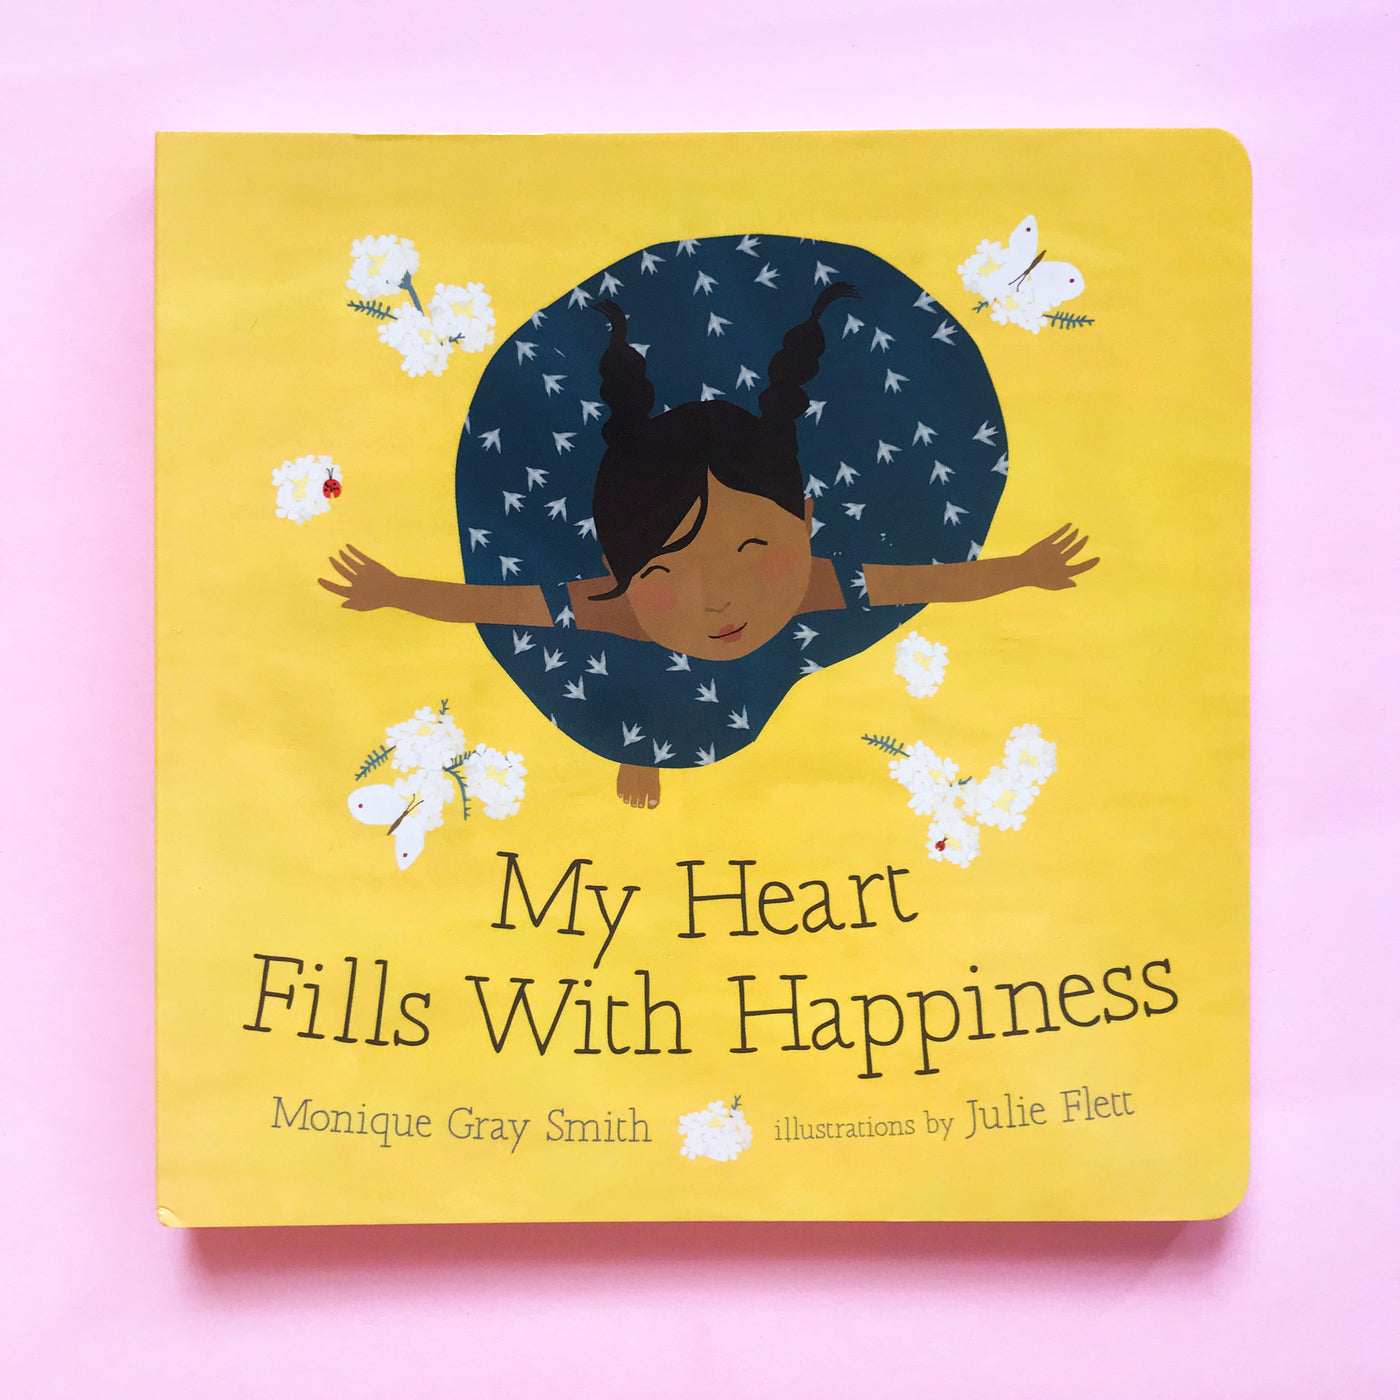 My Heart Fills With Happiness by Monique Gray Smith and Illustrated by Julie Flett